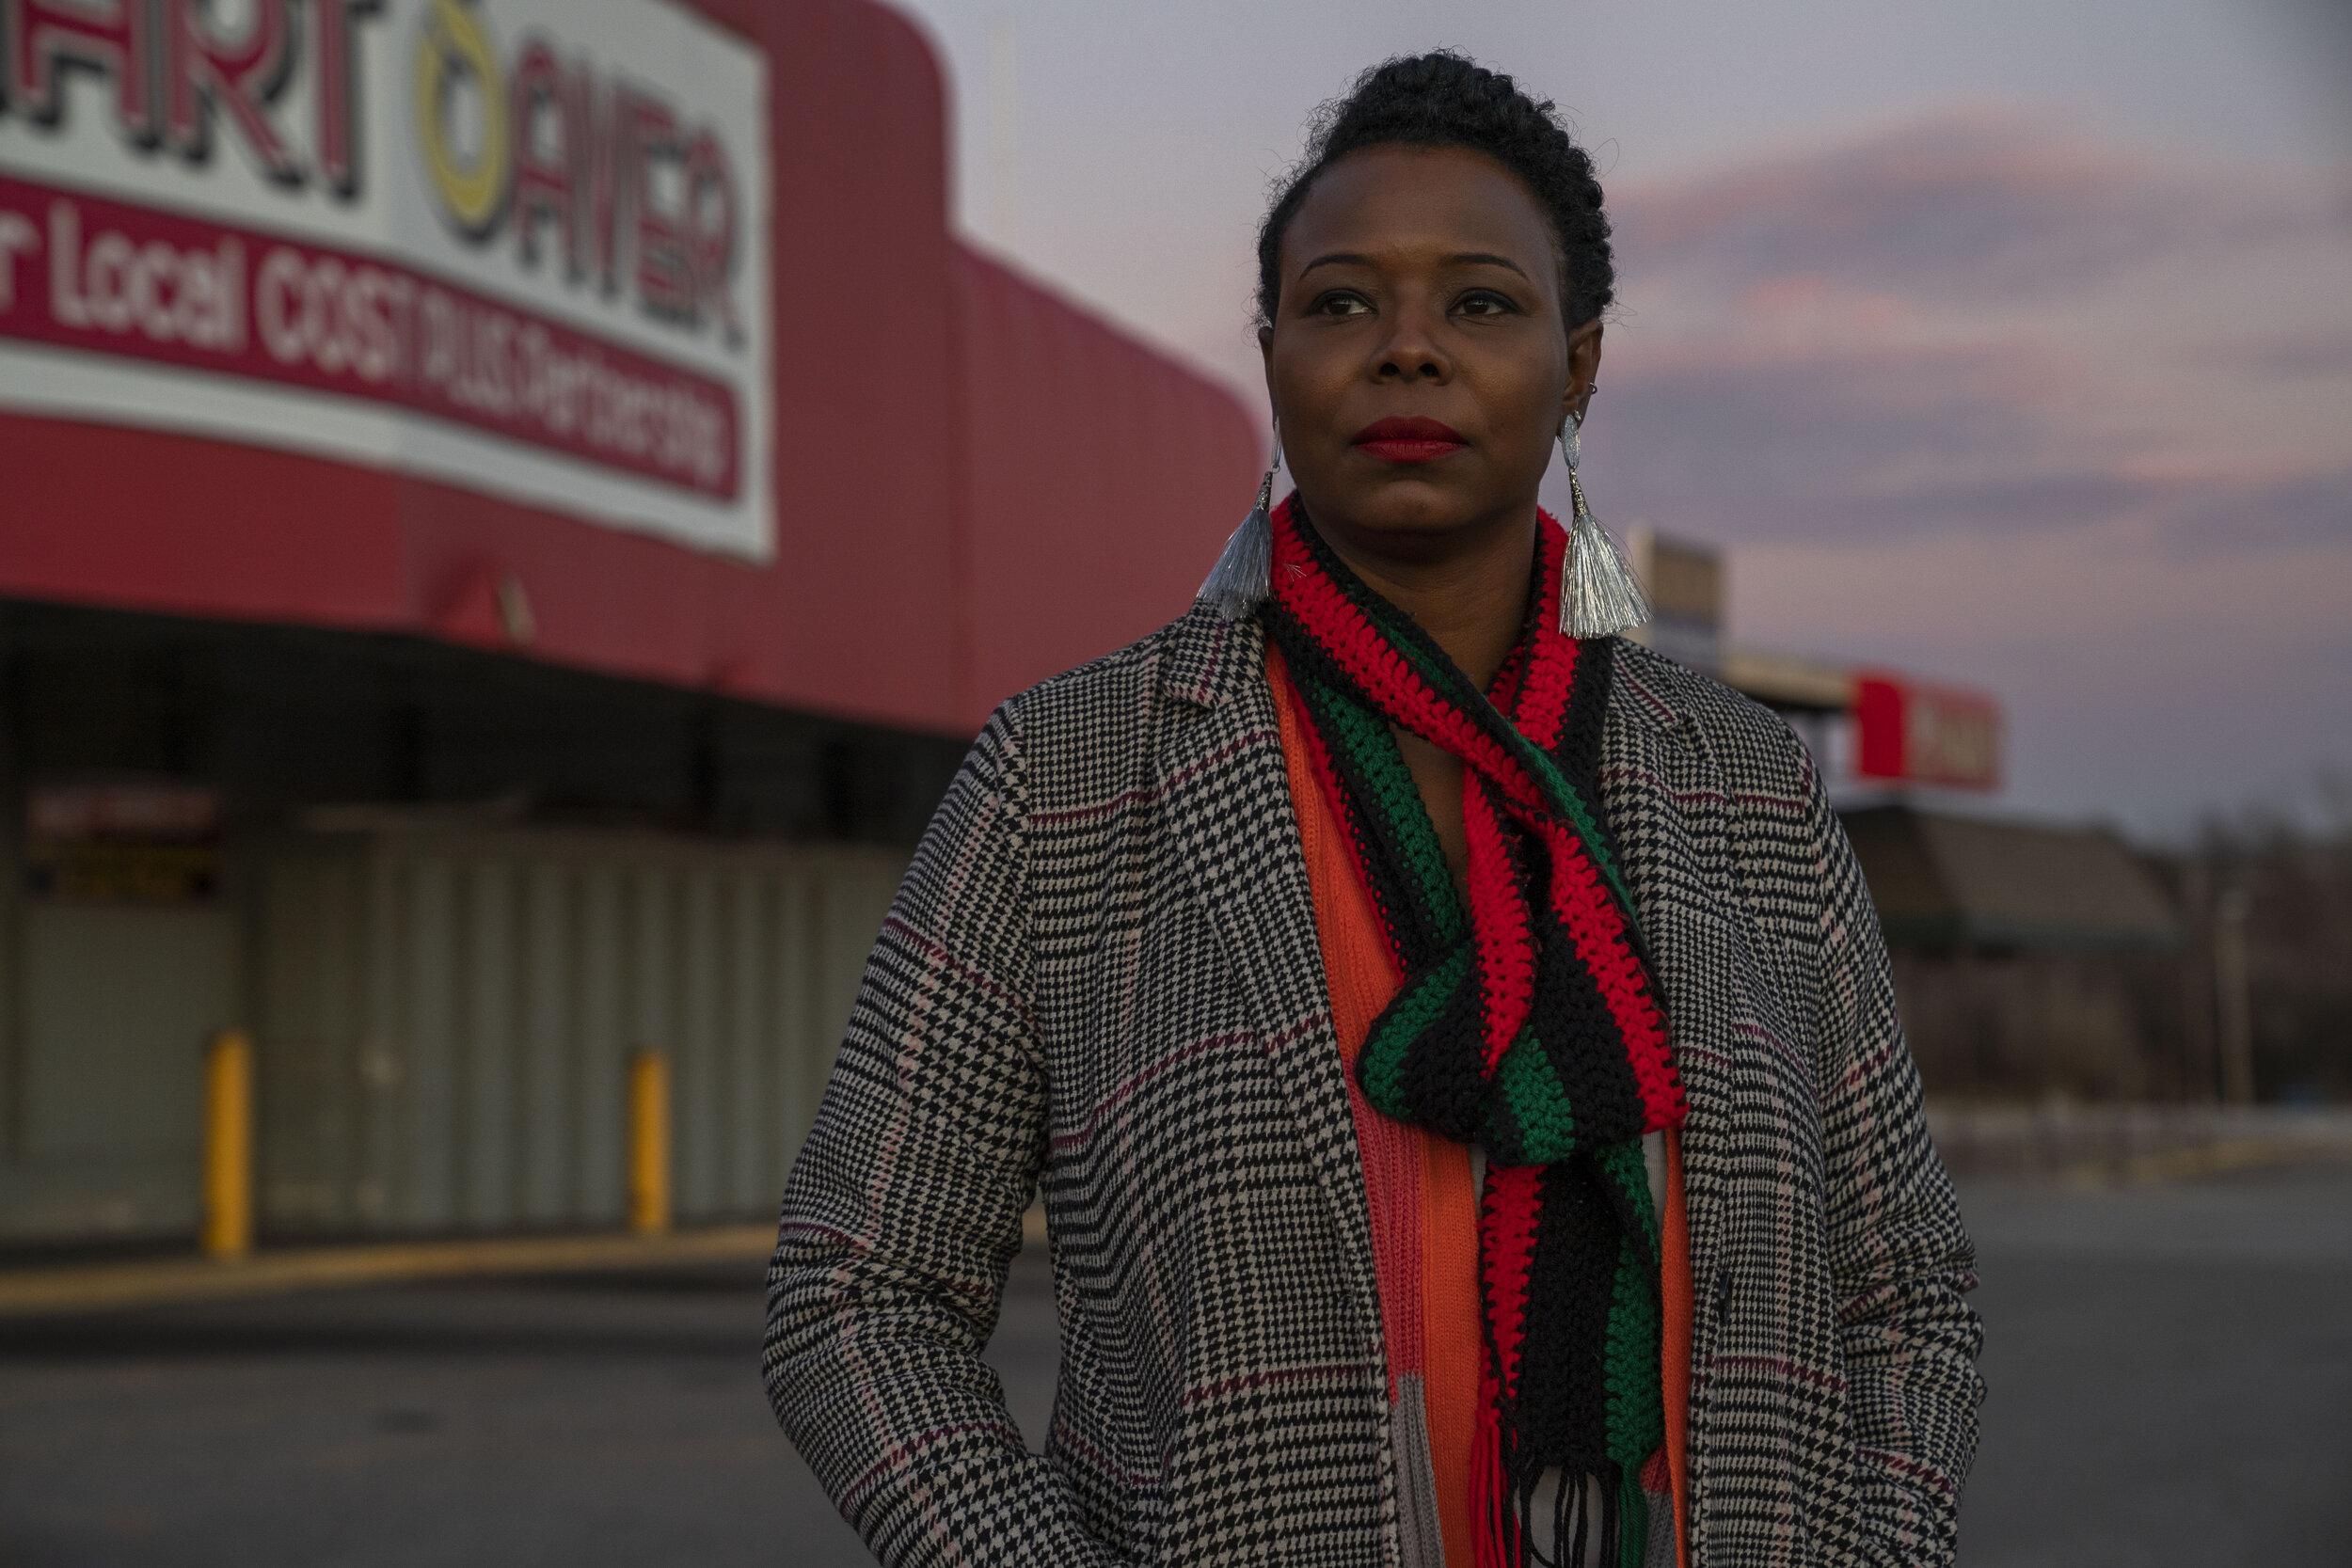  Ward 7 Councilwoman Nikki Nice poses for a portrait in front of the recently closed Smart Saver grocery store in Oklahoma City, Oklahoma, December 13, 2019. CREDIT: Nick Oxford for The Wall Street Journal 